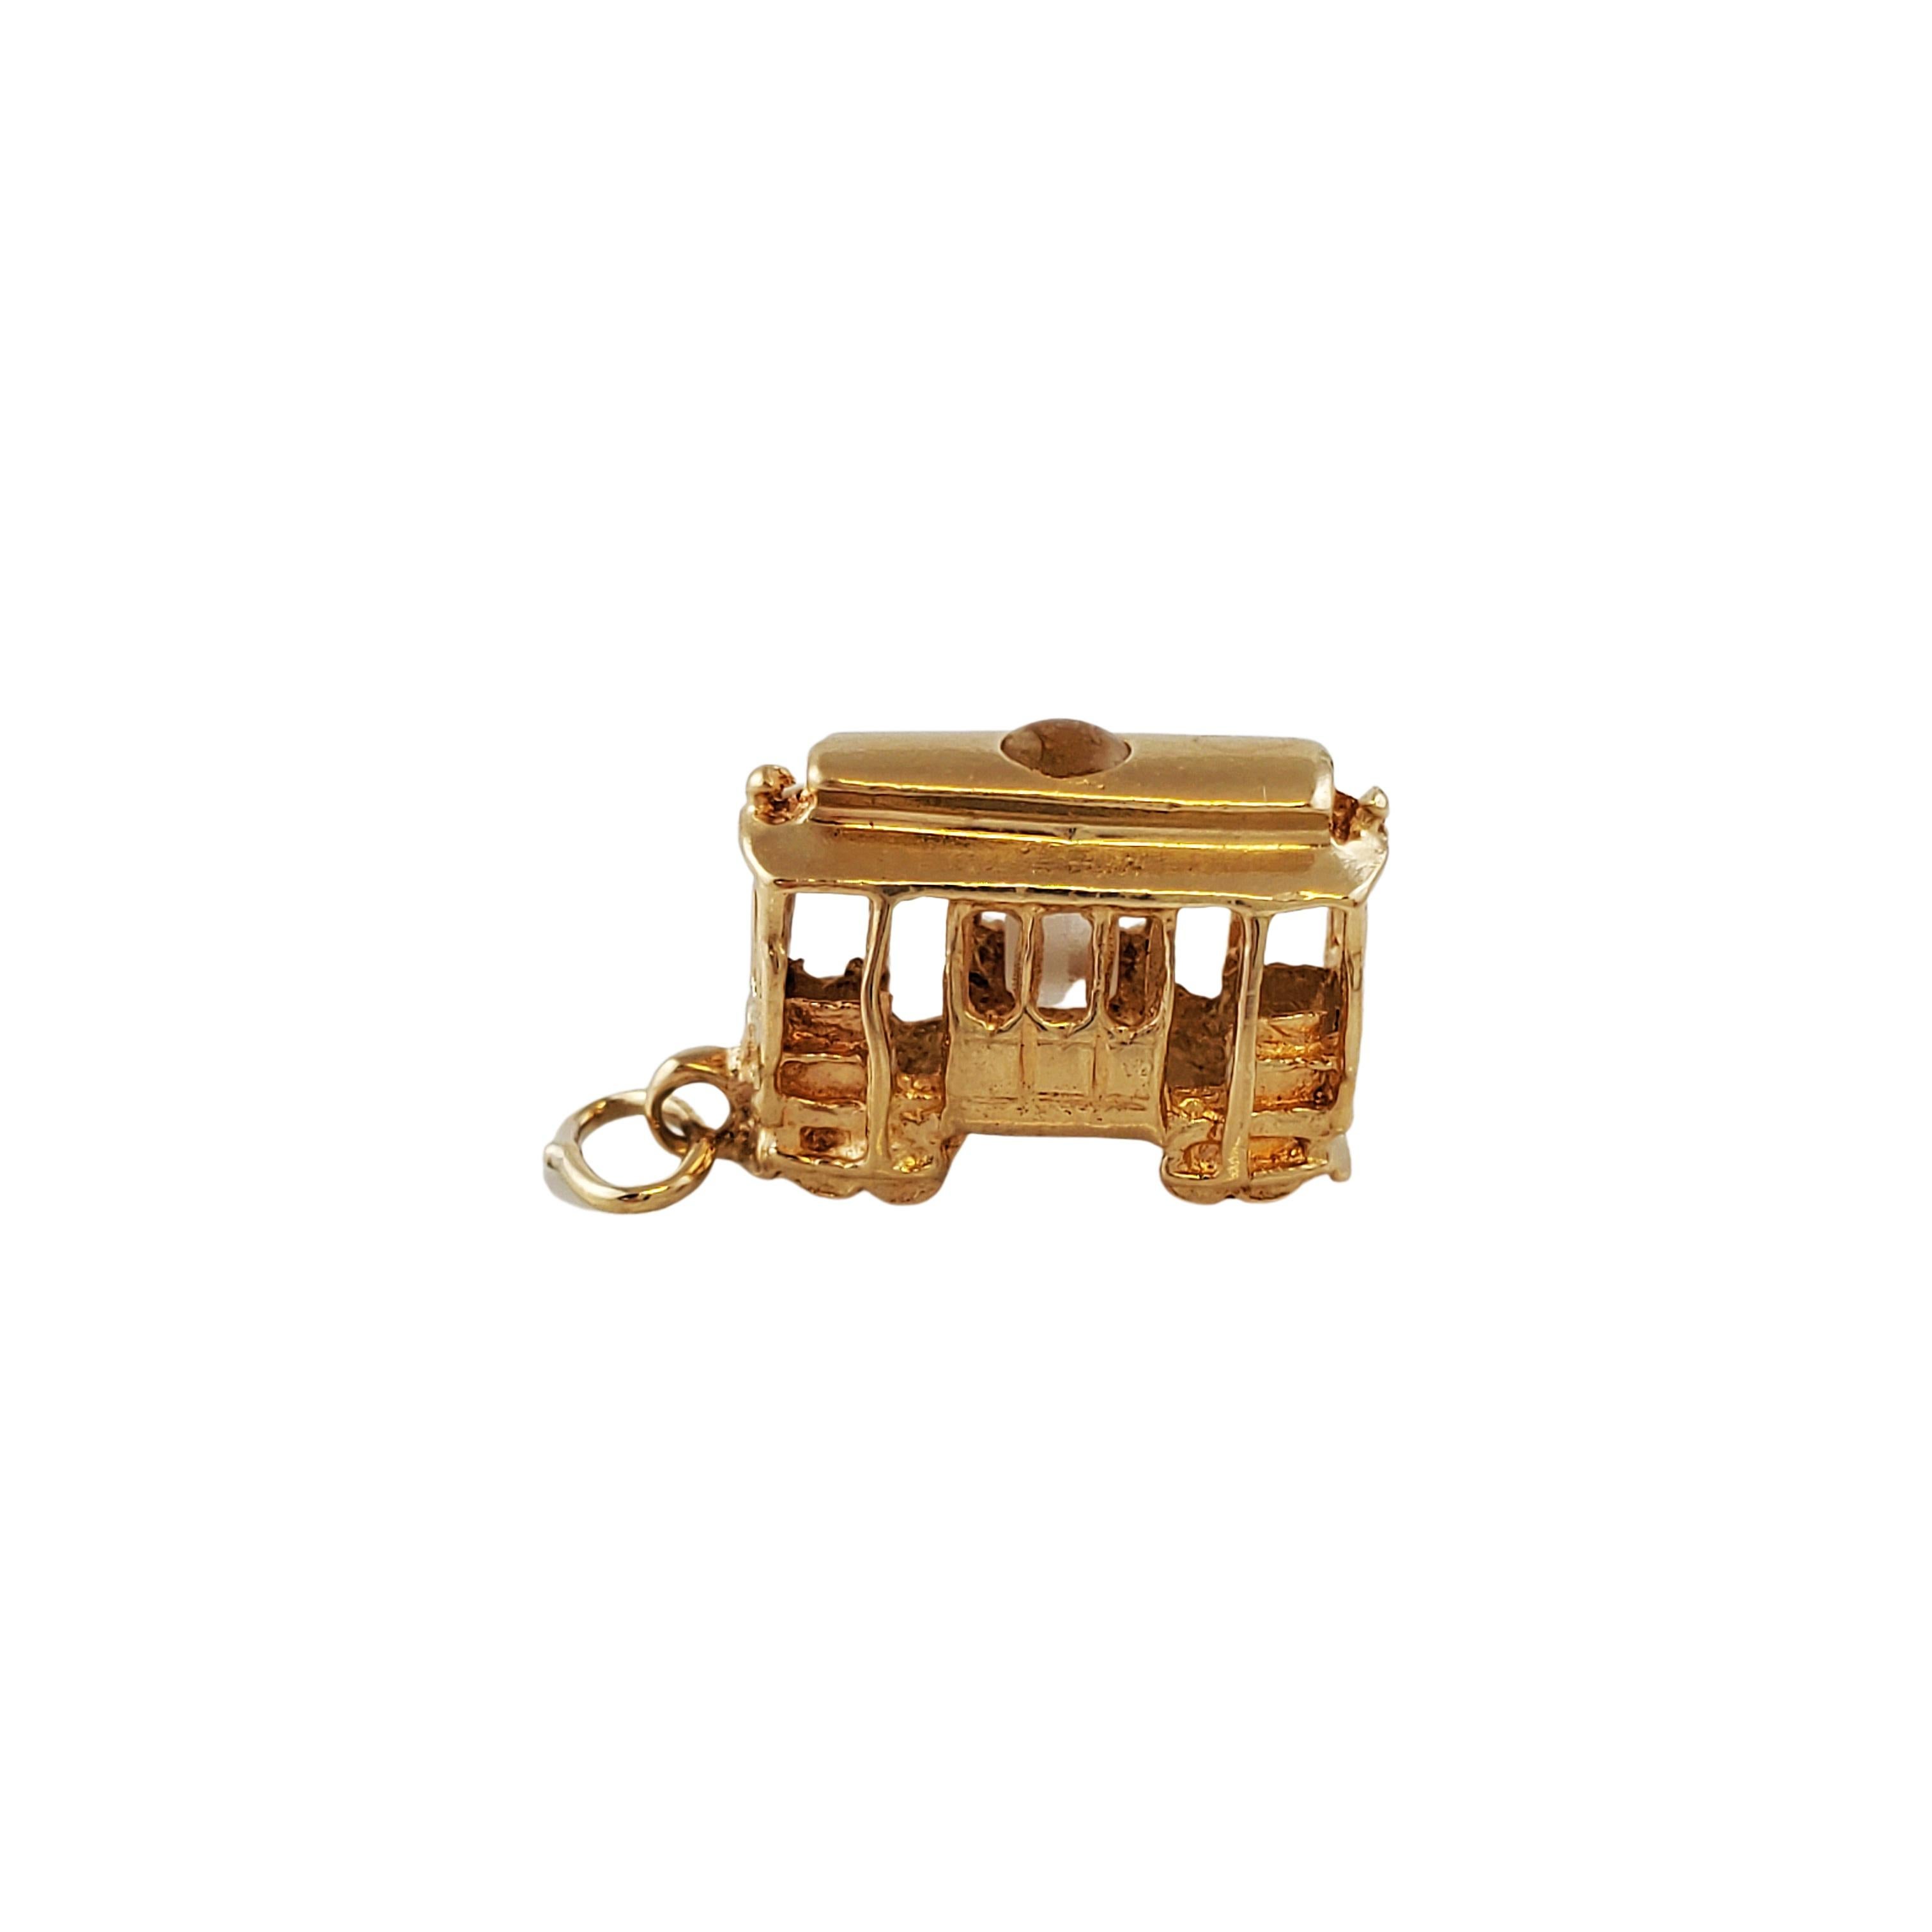 Vintage 14K Yellow Gold Trolly Charm

Beautiful 3D 14k yellow gold trolly charm with life like detailing. 

Size: 19mm X 10mm

Weight: 1.6 gr / 1.0 dwt

Hallmark: 14K

Very good condition, professionally polished.

Will come packaged in a gift box